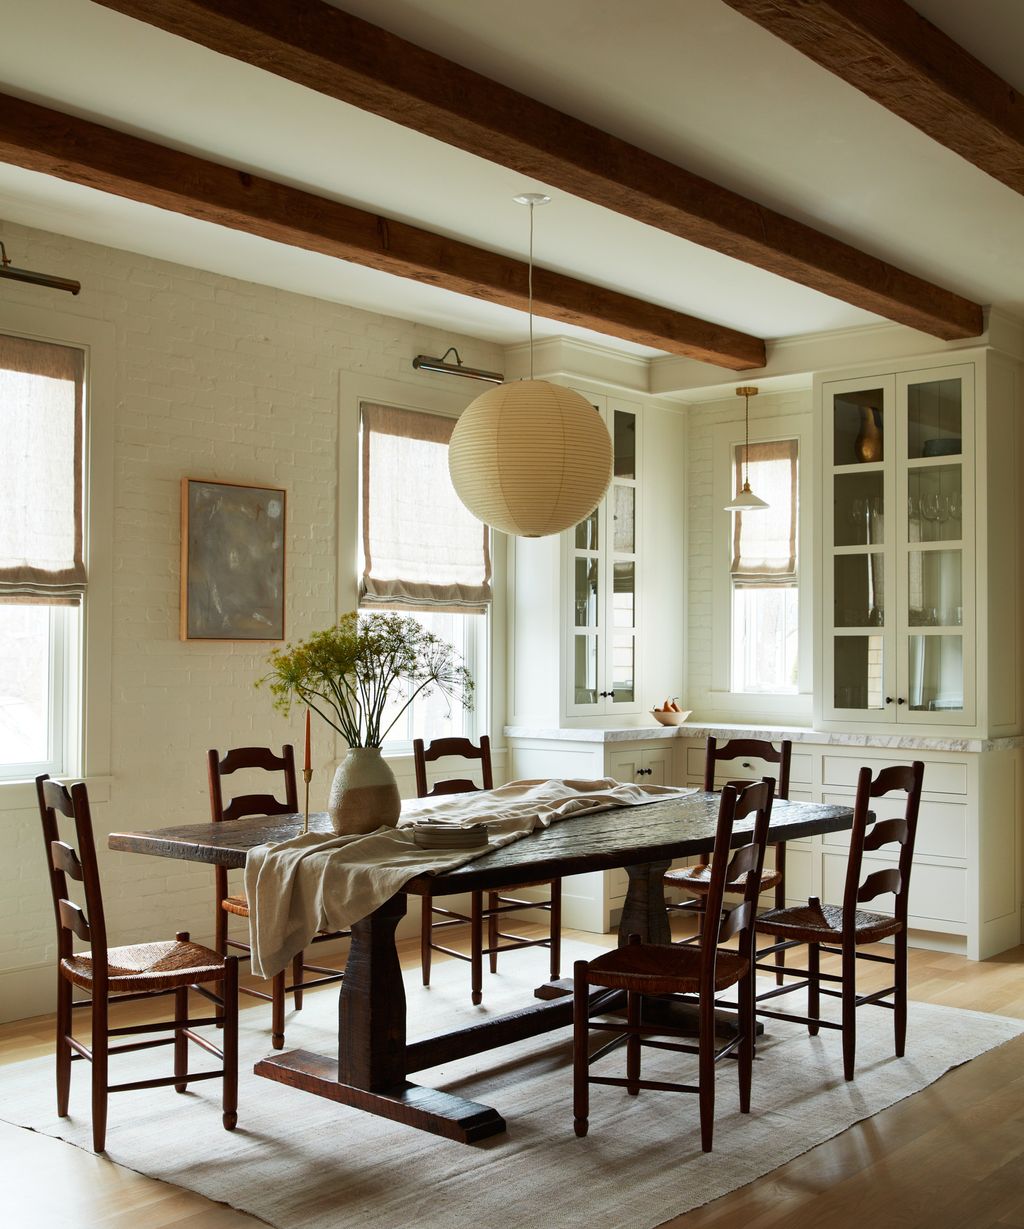 8 design tips to take from this classic New England home